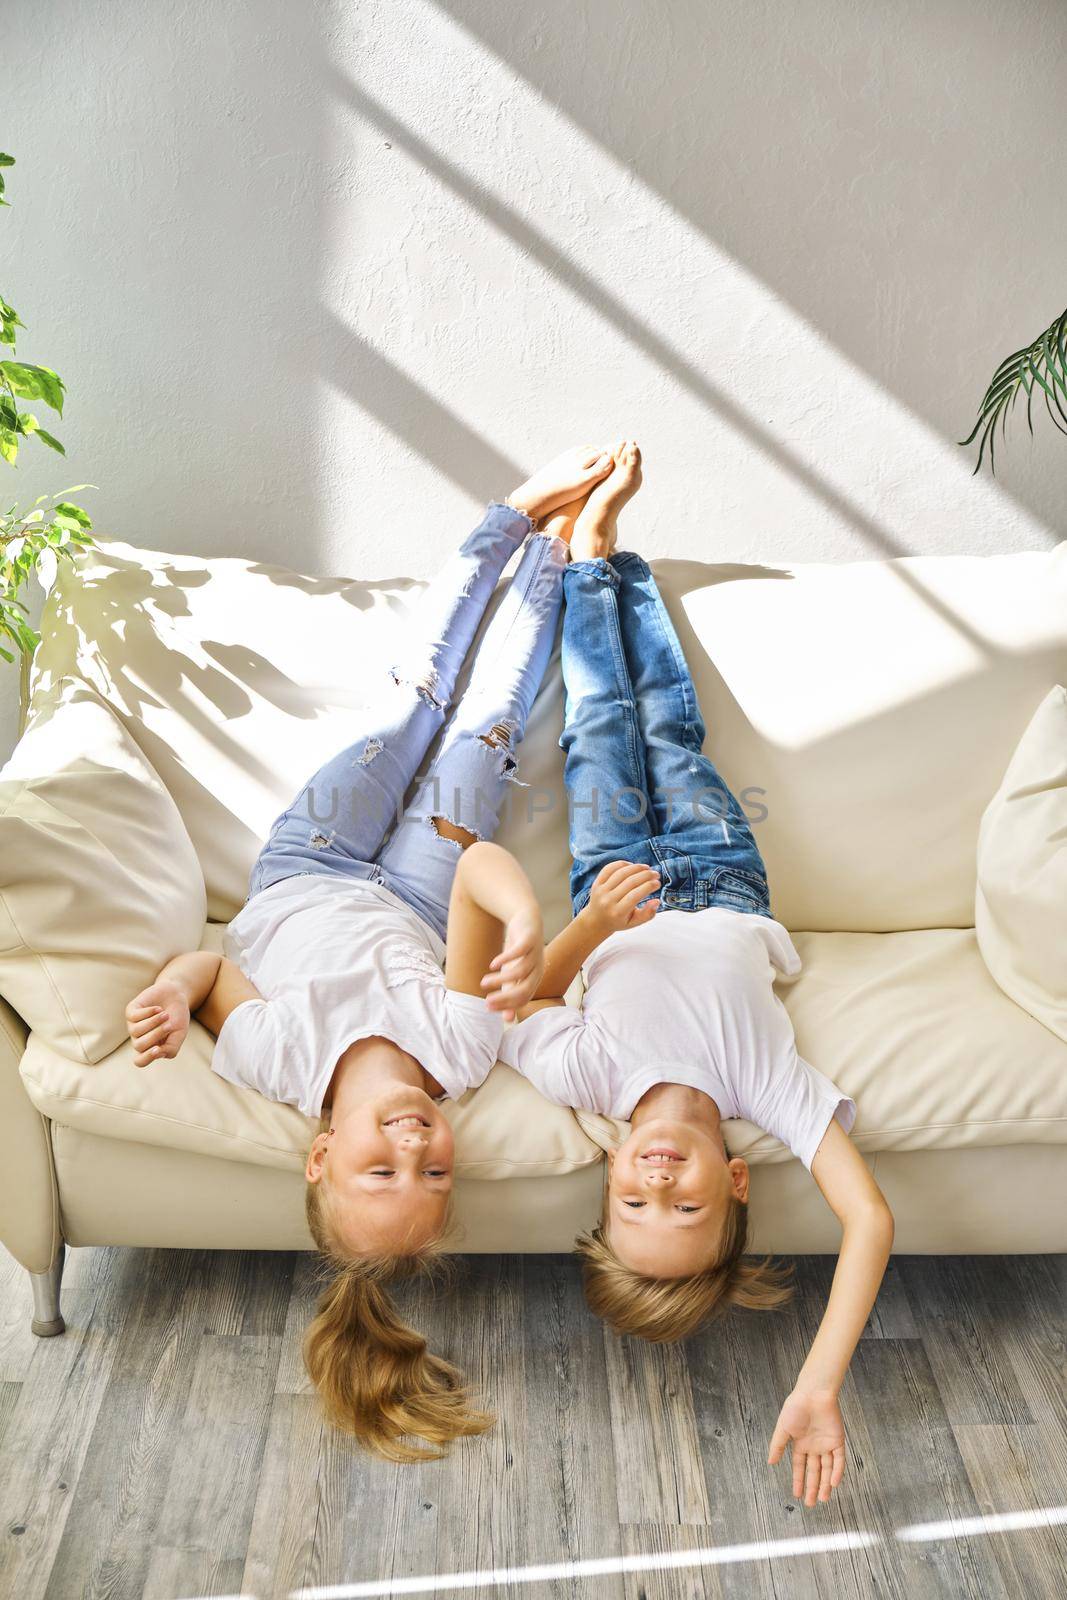 Pretty little girl and boy are lying on their backs on sofa in living room, looking at camera and smiling while playing at home